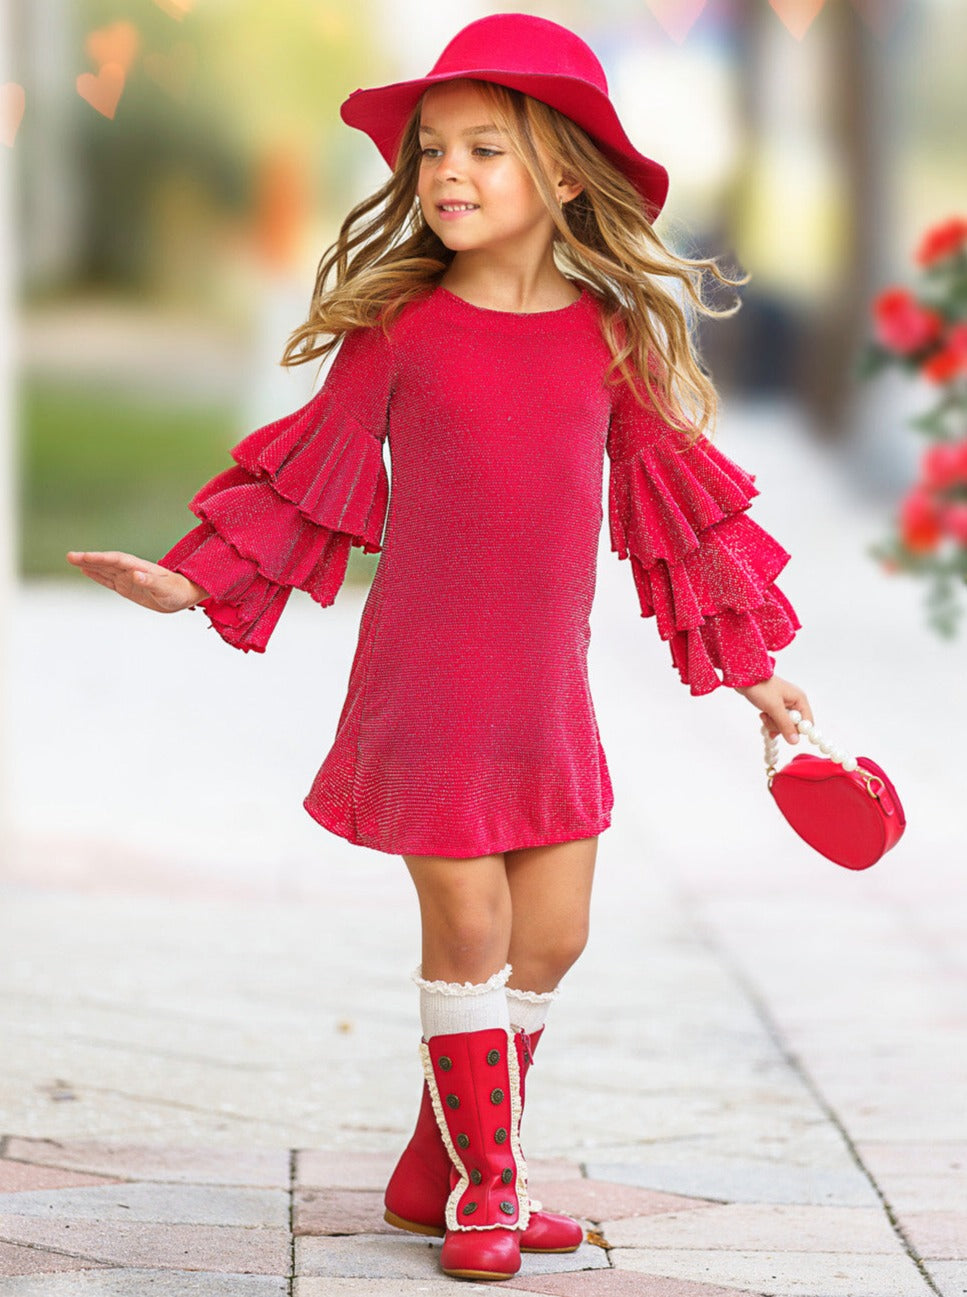 Mia Belle Girls Tiered Sleeve Dress | Girls Fall Outfits